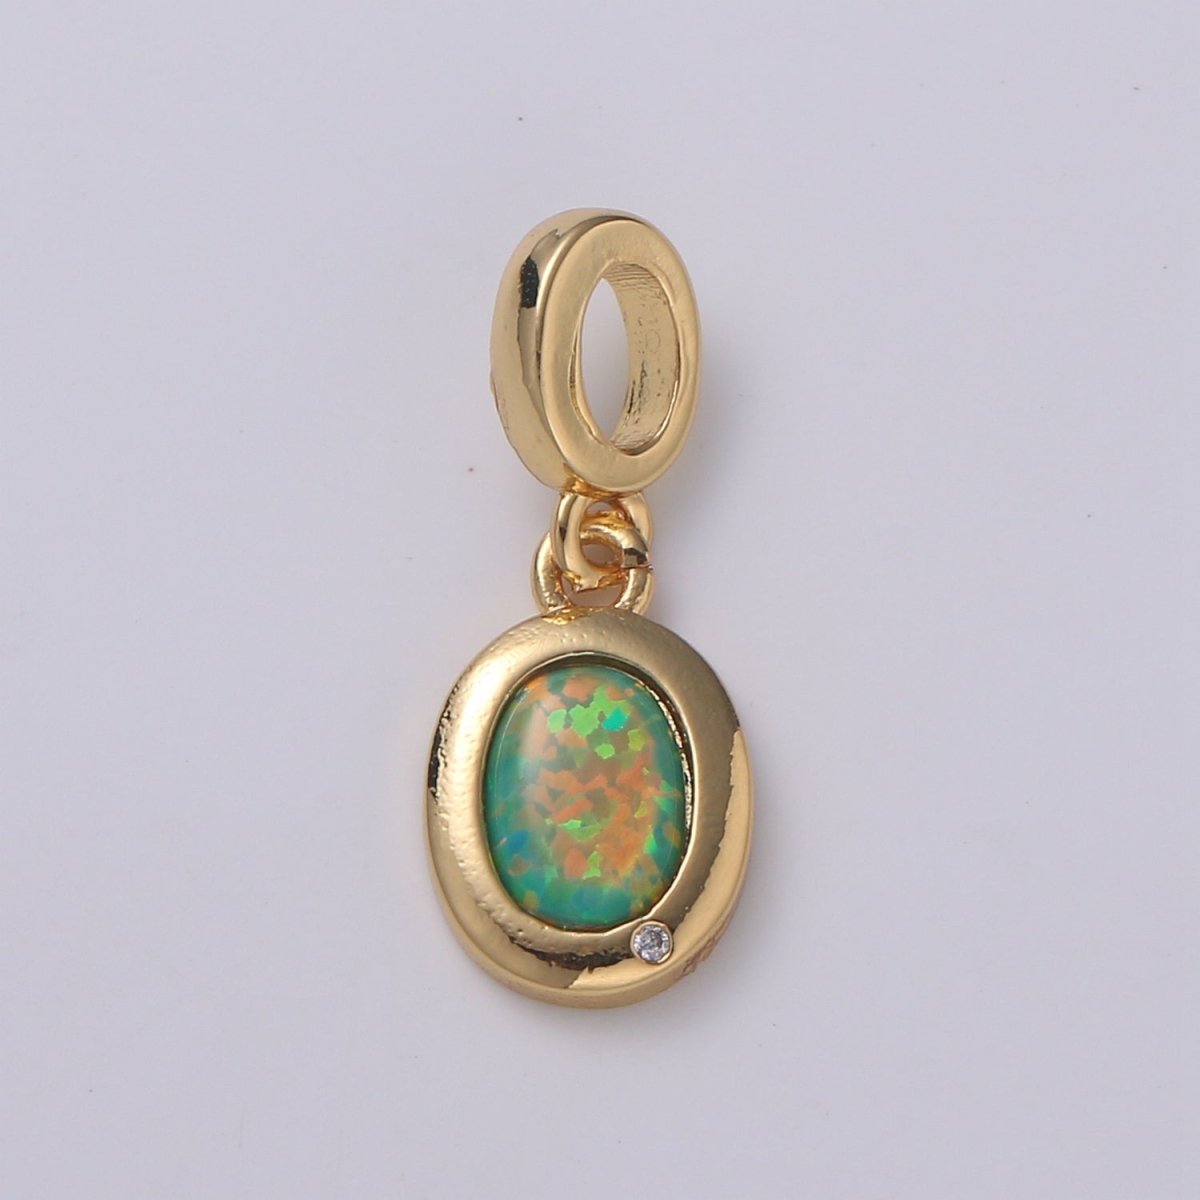 Dainty Solitaire Pendant 14K Gold Filled Oval Pendant for necklace Opal Charm Birthstone Cubic Zirconia Geometriz Bezel Charm H-389 H-390 H-392 H-397 - DLUXCA